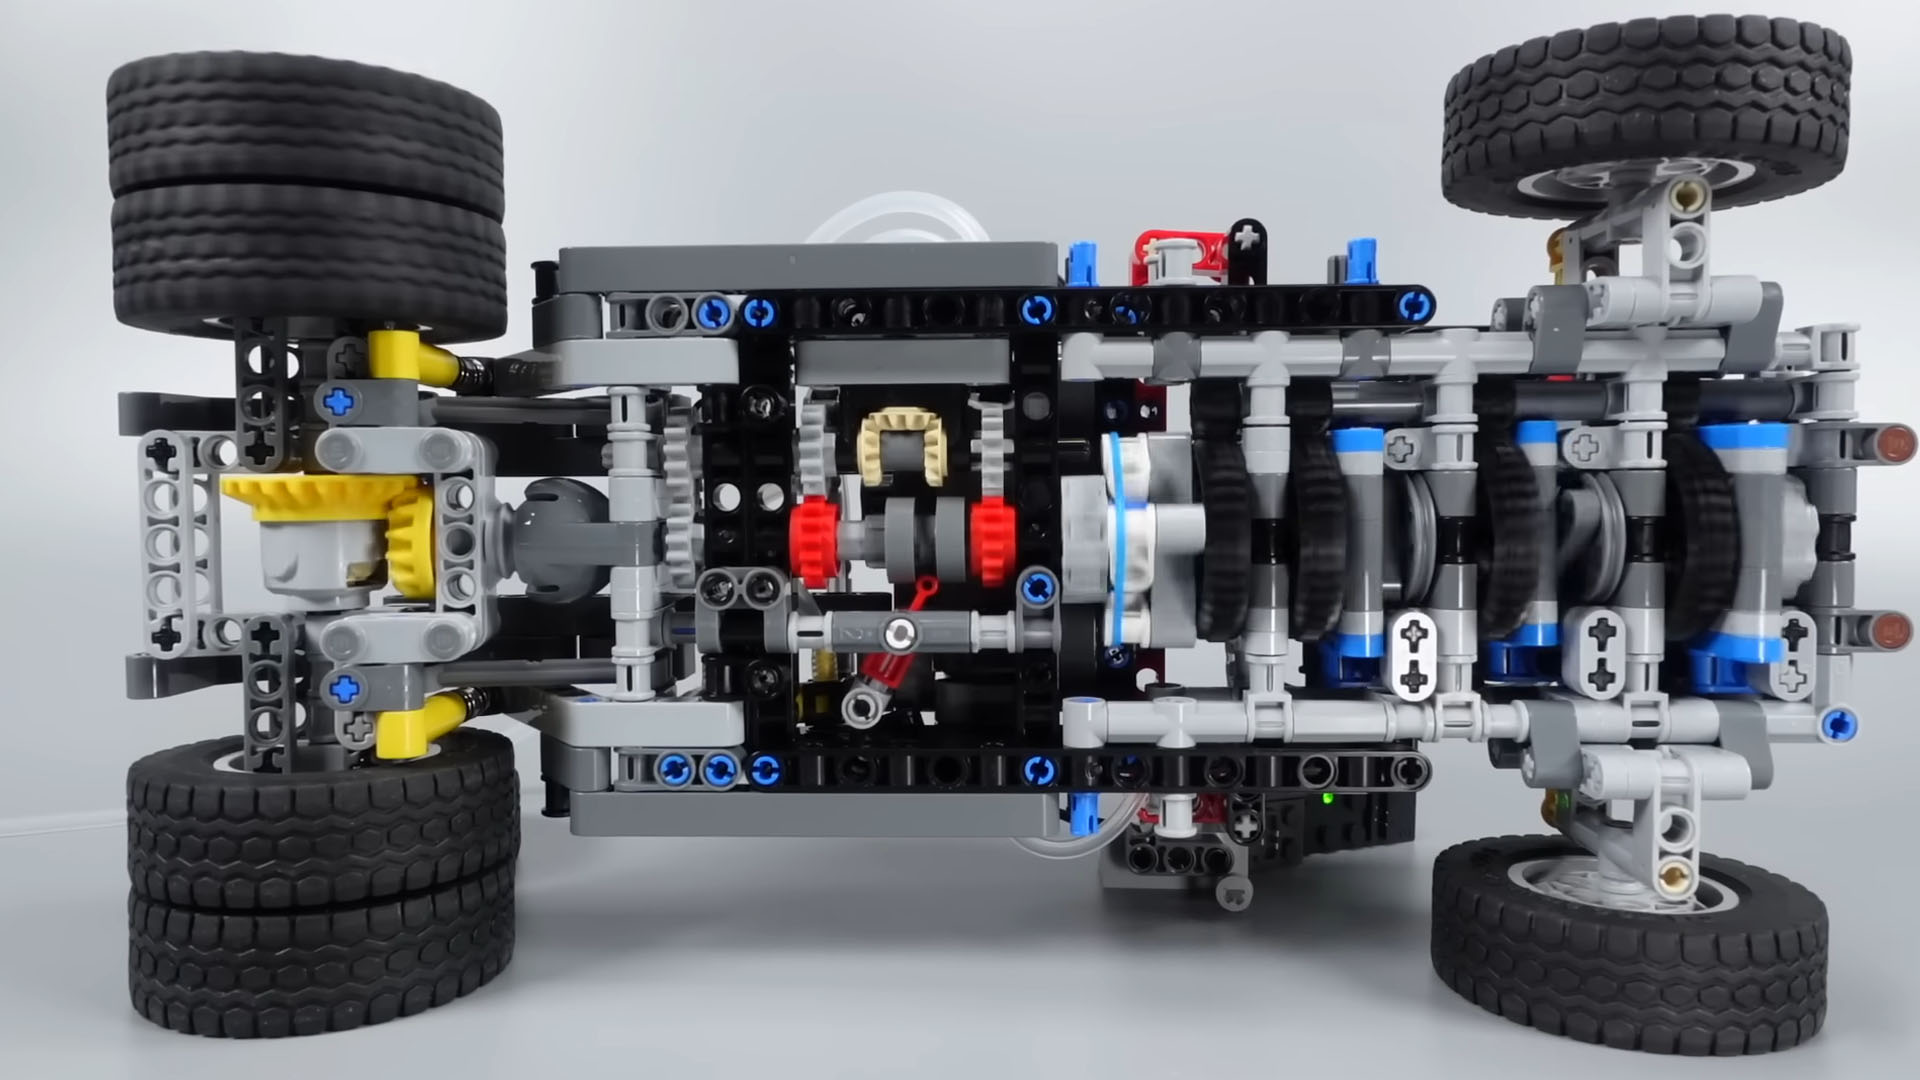 Watch This Lego Truck Run With a Three-Cylinder Engine